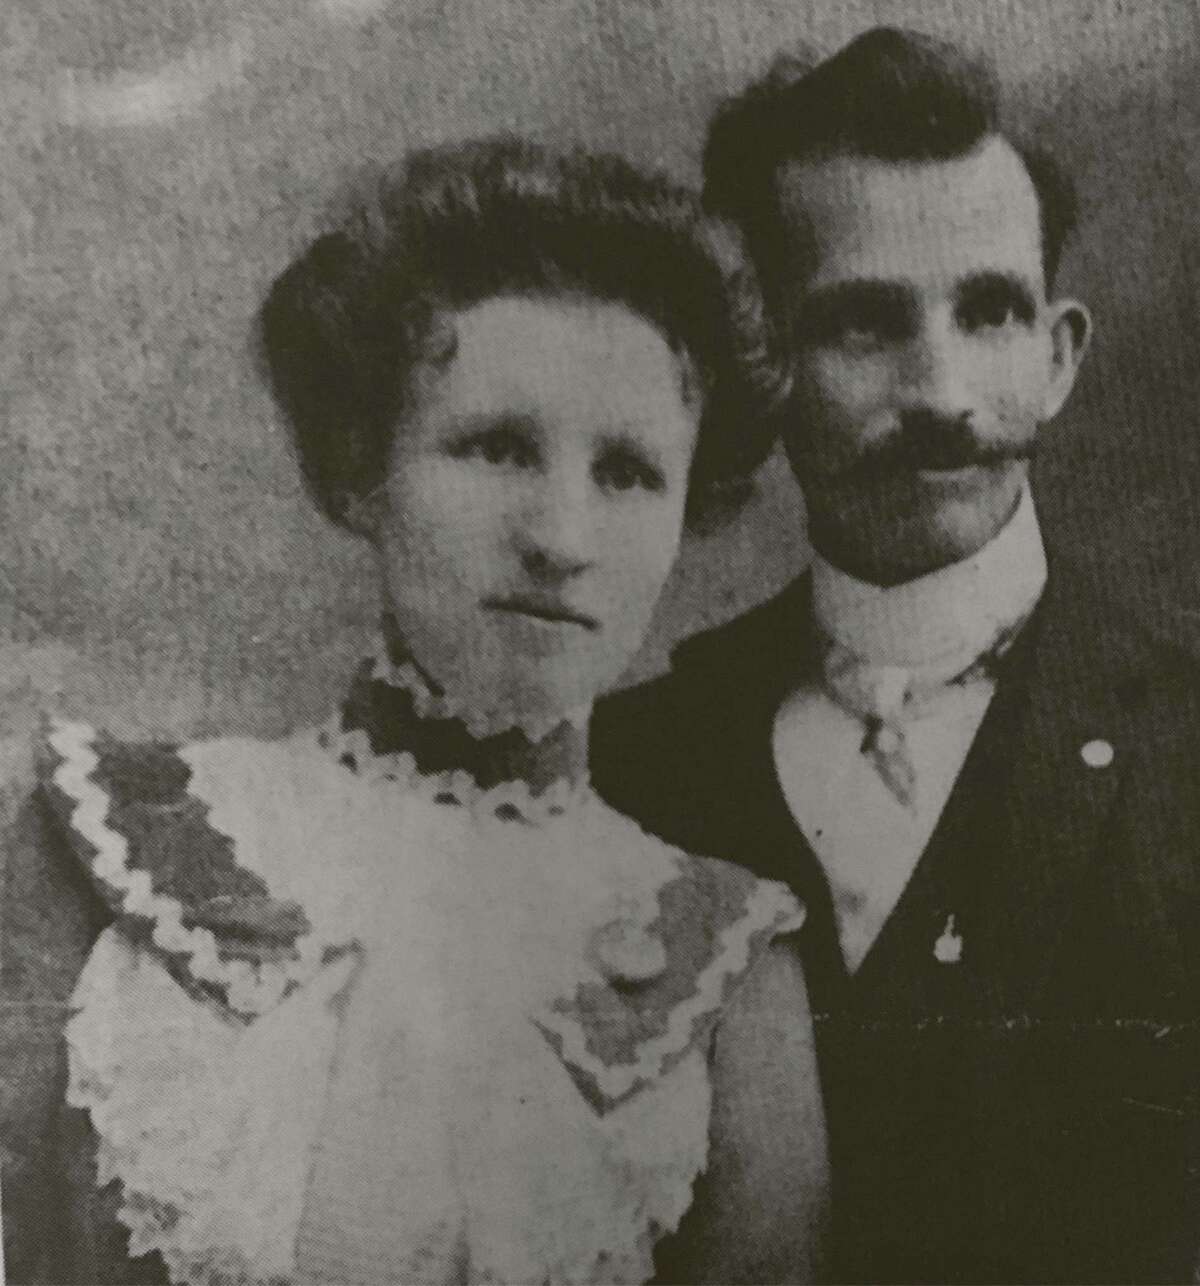 Richard and Clara Anderson Knight in 1901 on their honeymoon in Houston.